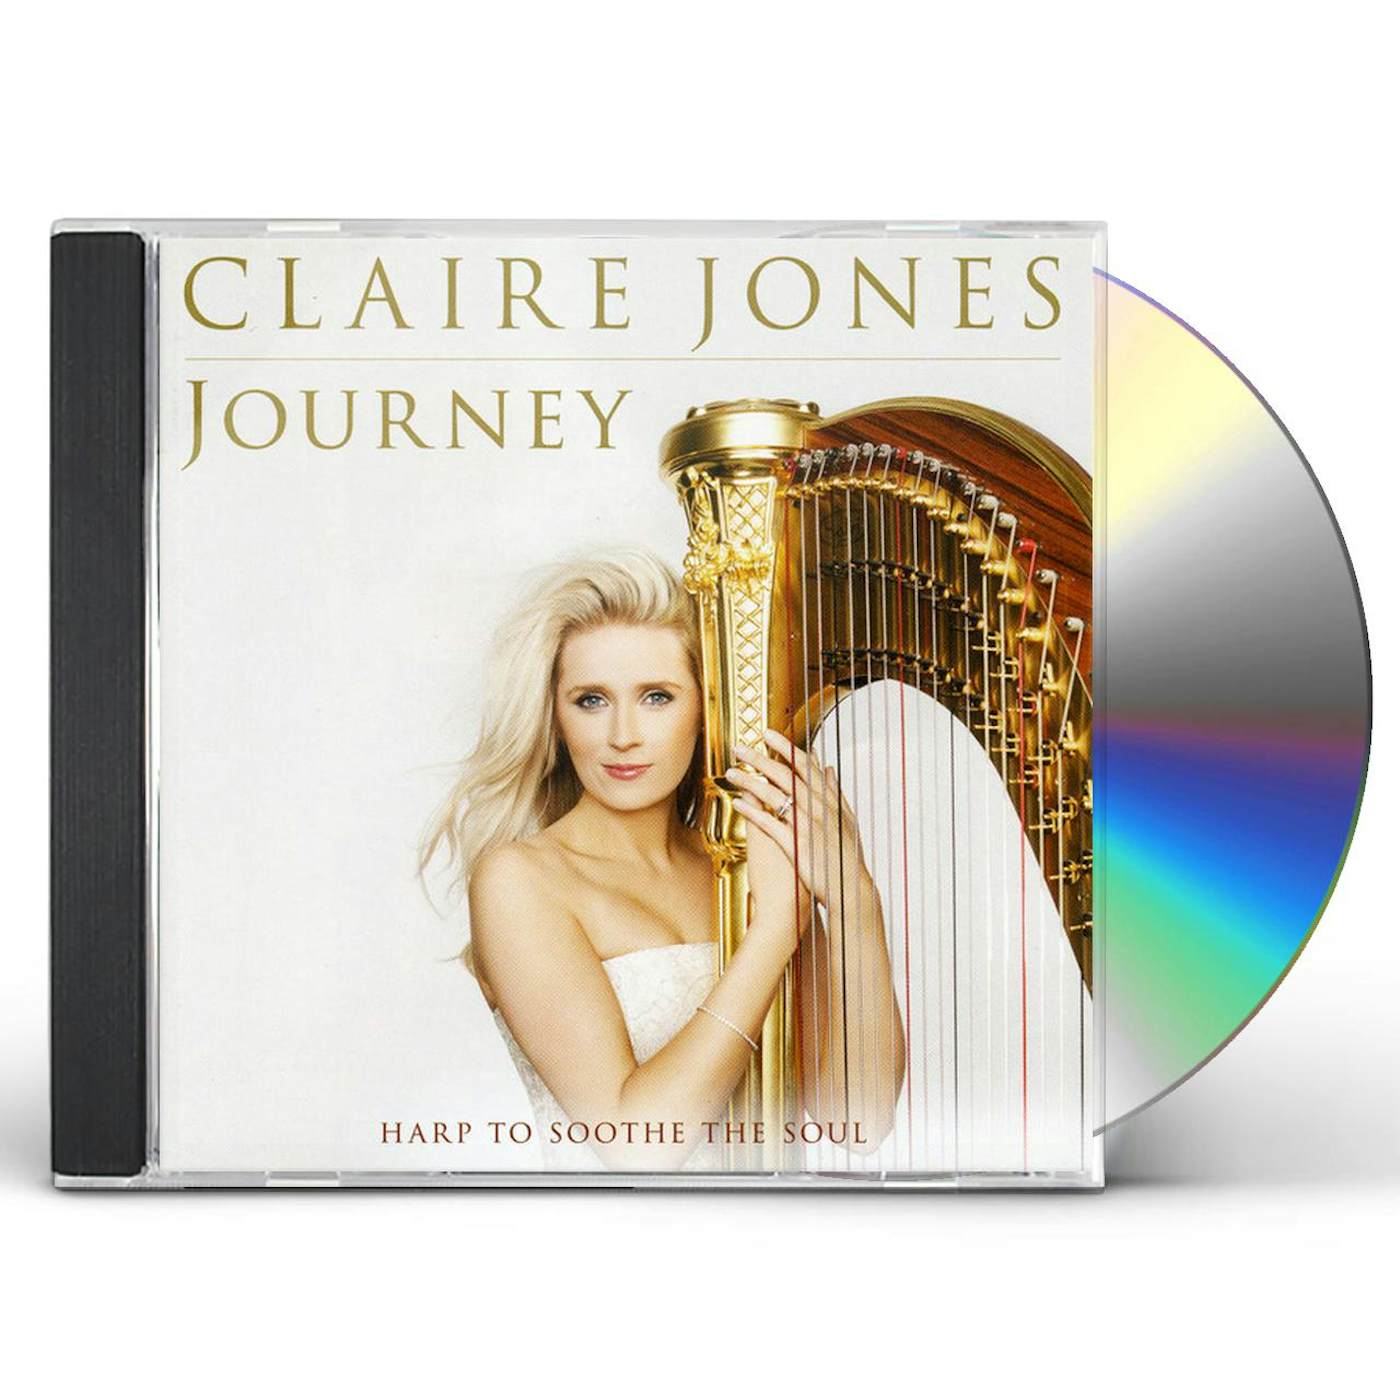 Claire Jones JOURNEY HARP TO SOOTHE THE SOUL CD